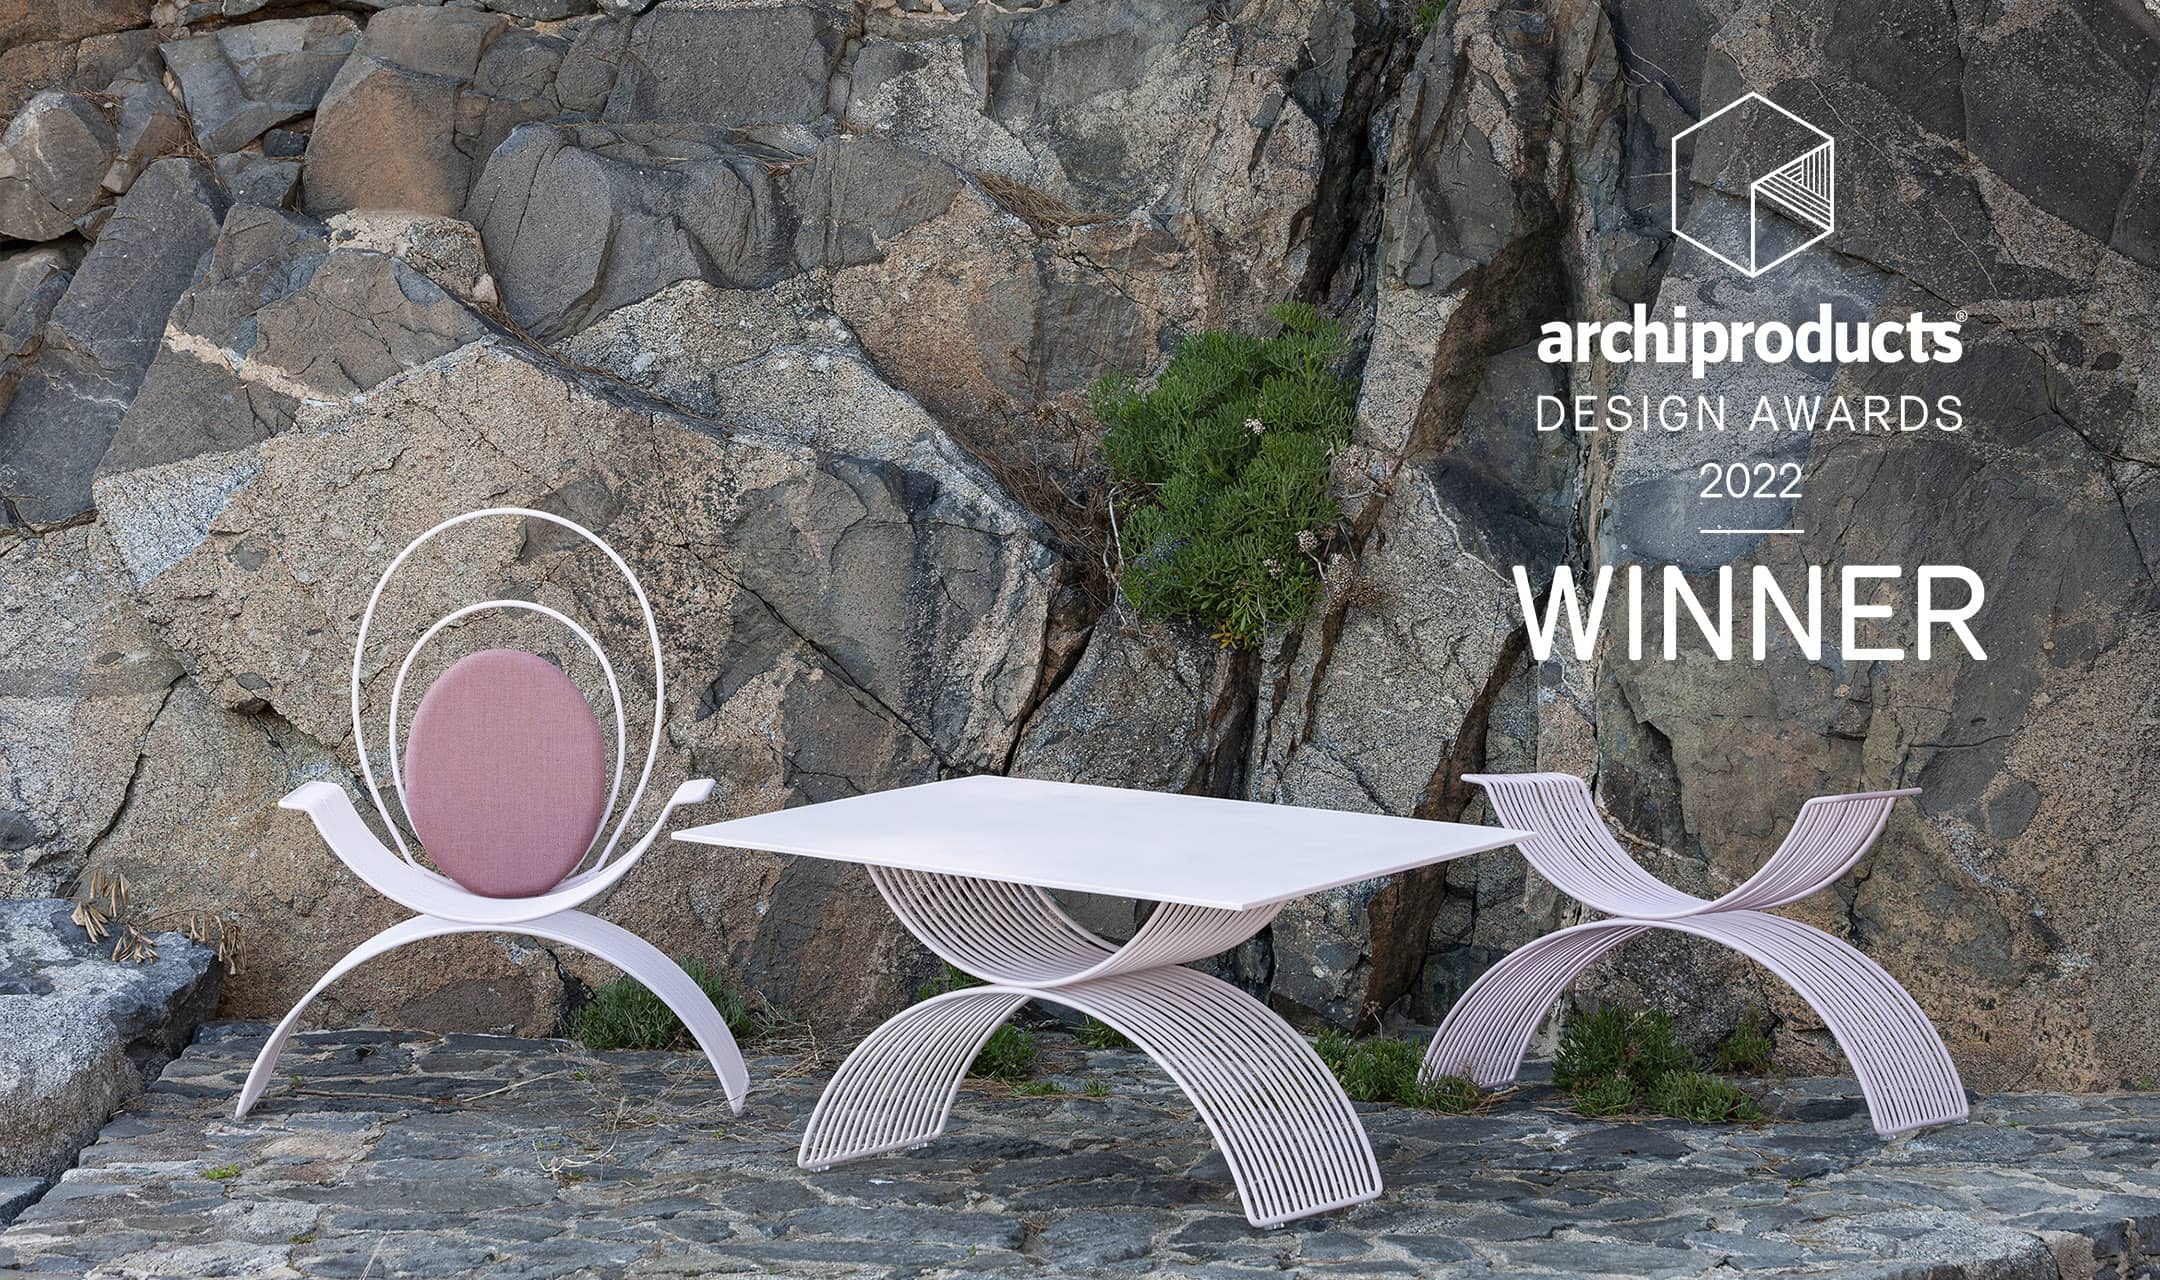 The ROMANA wins the Archiproduct Awards